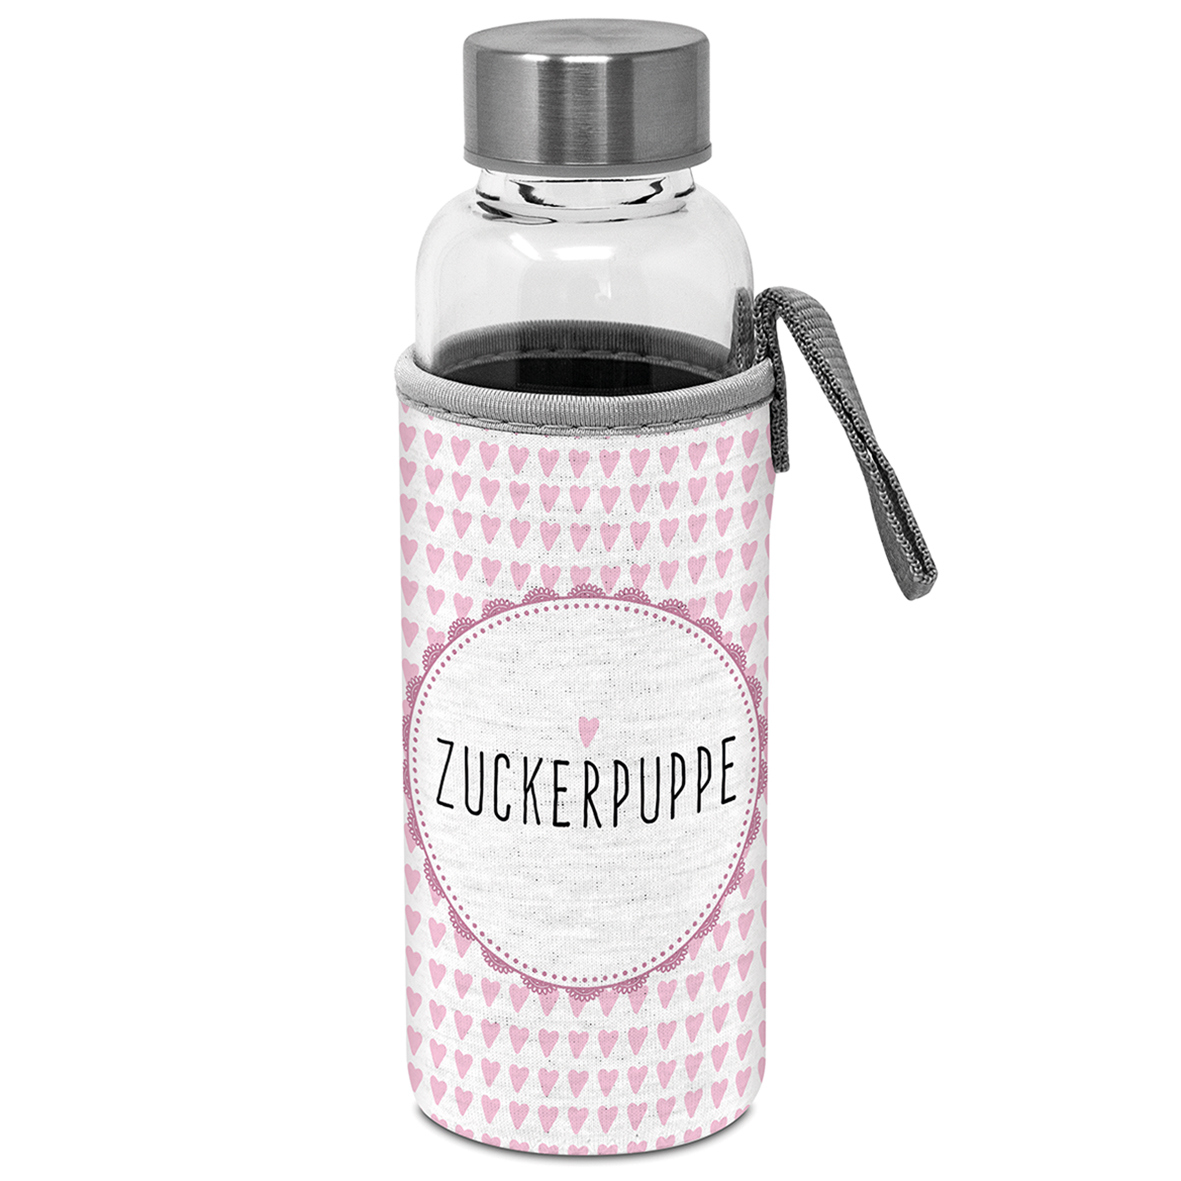 Glass Bottle with protection sleeve Zuckerpuppe